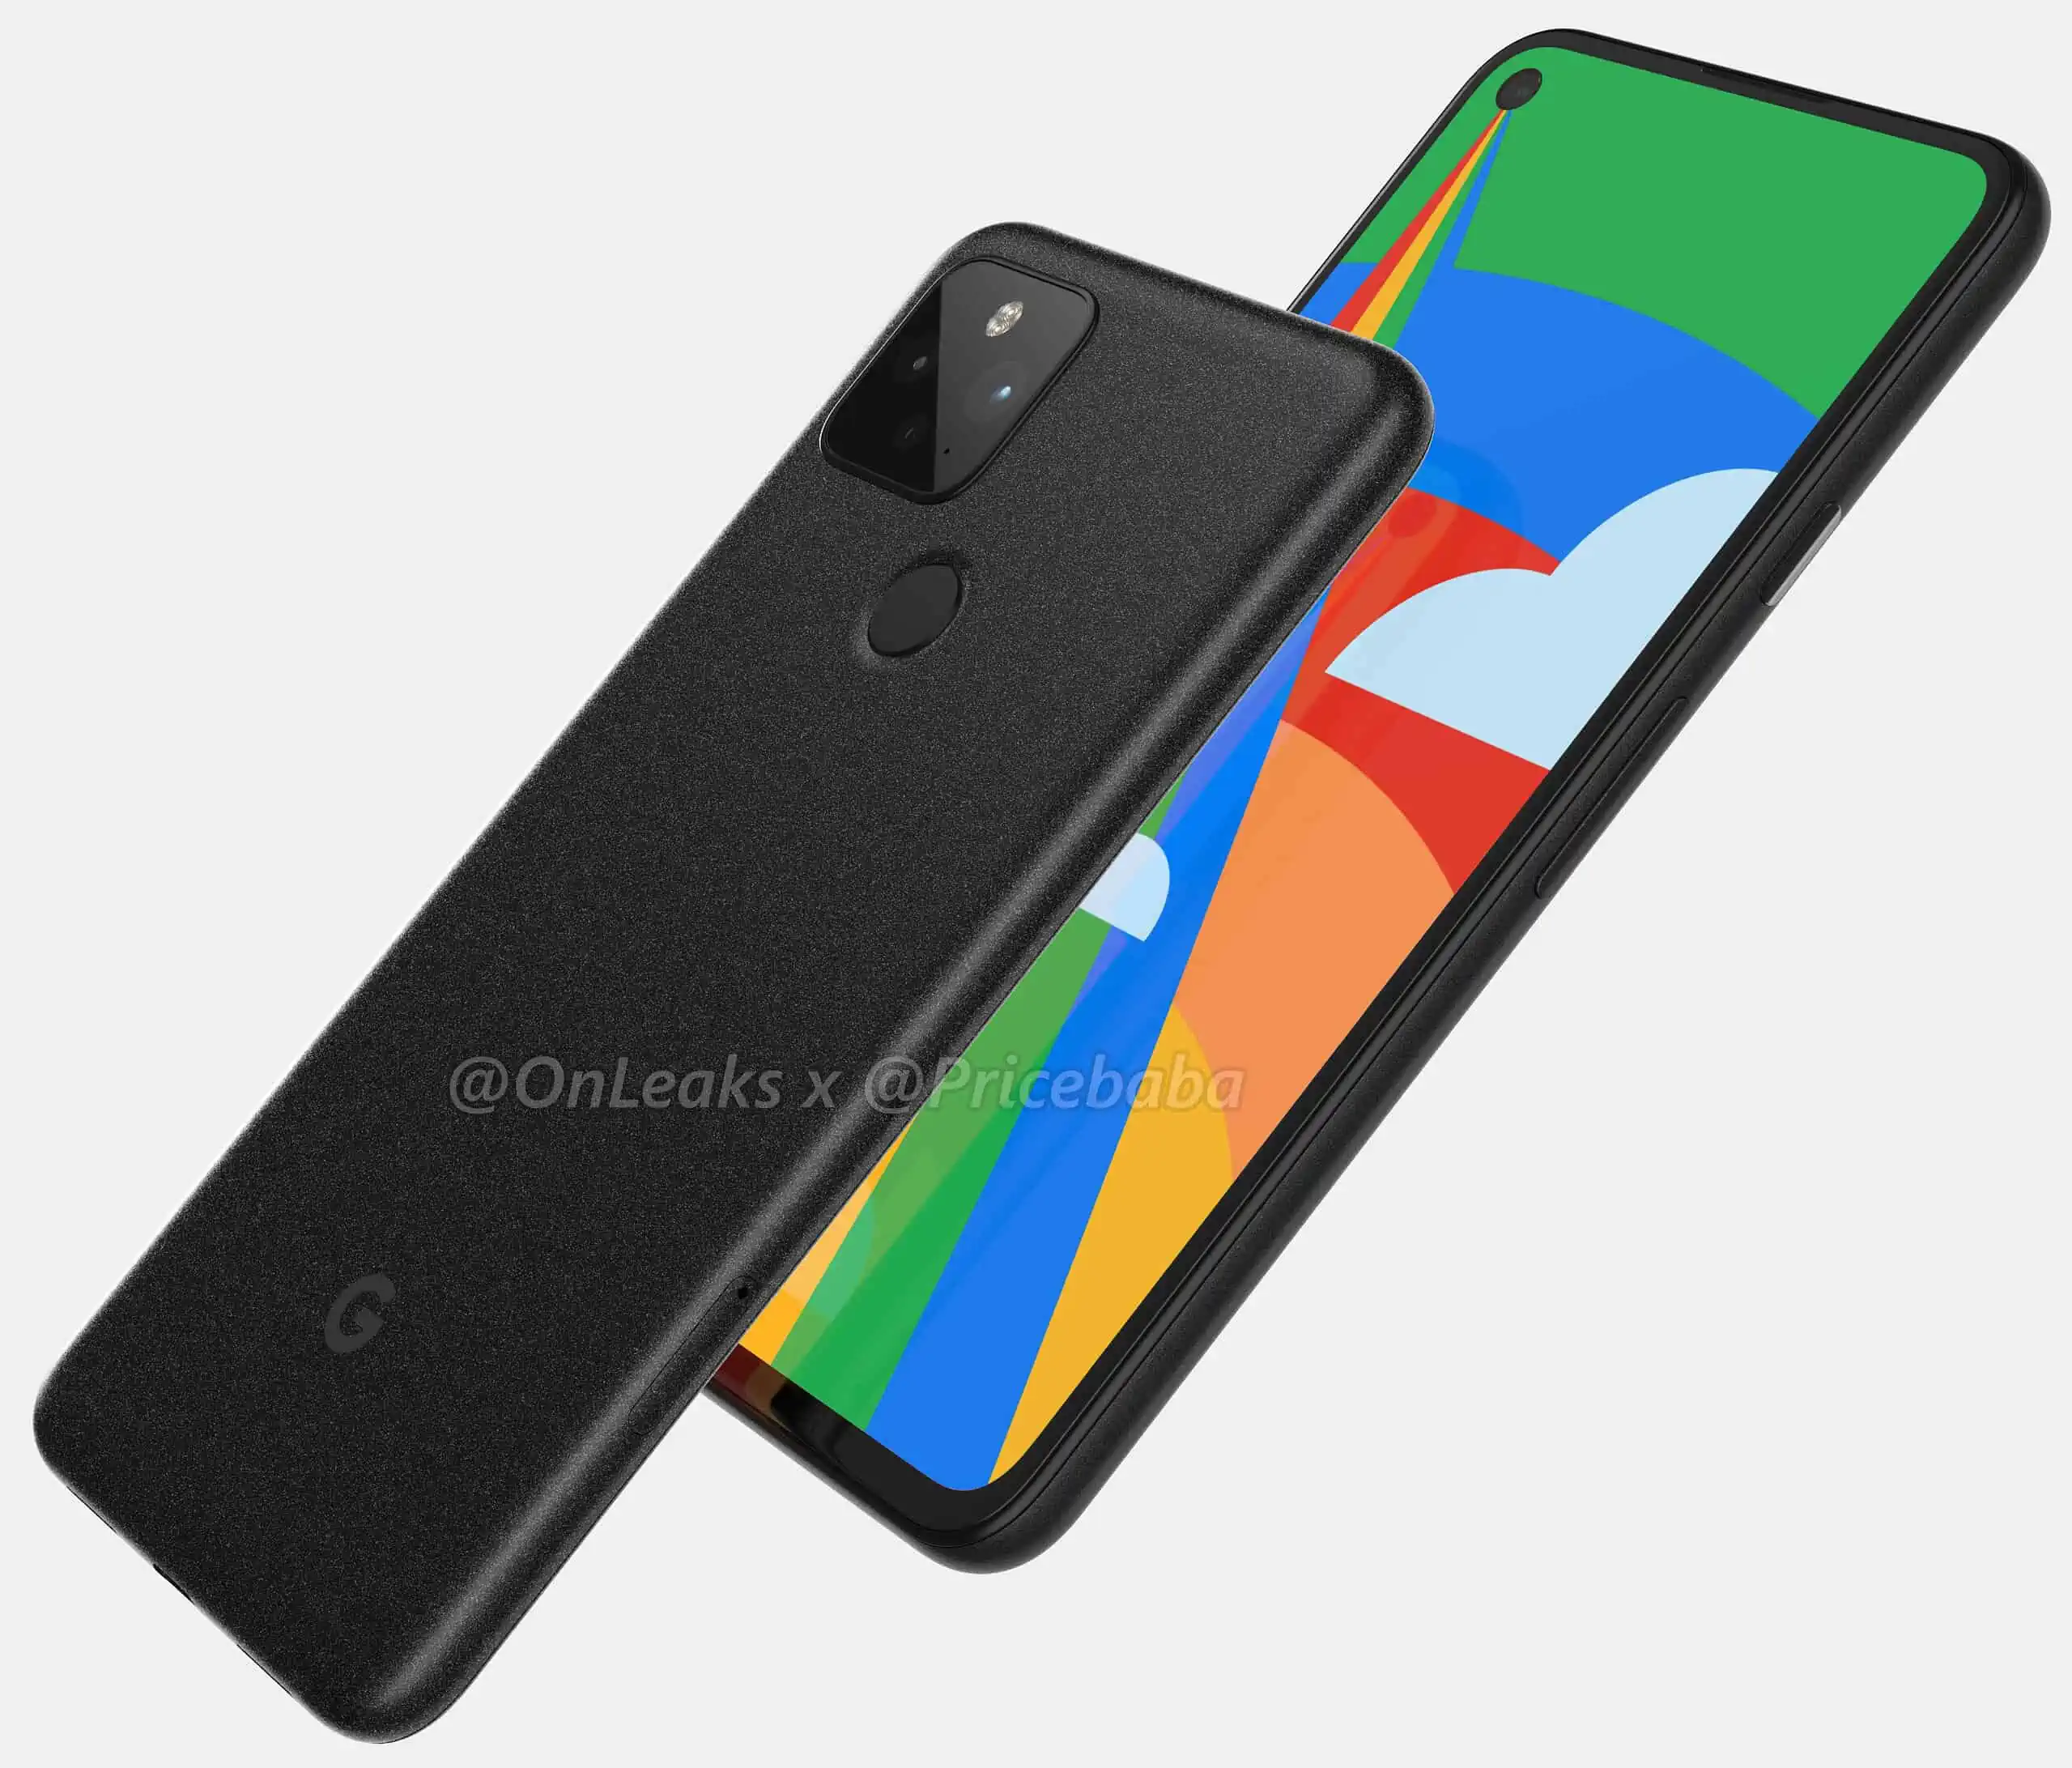 Release date of Google Pixel 4a 5G and Pixel 5 5G revealed, and it’s bad news